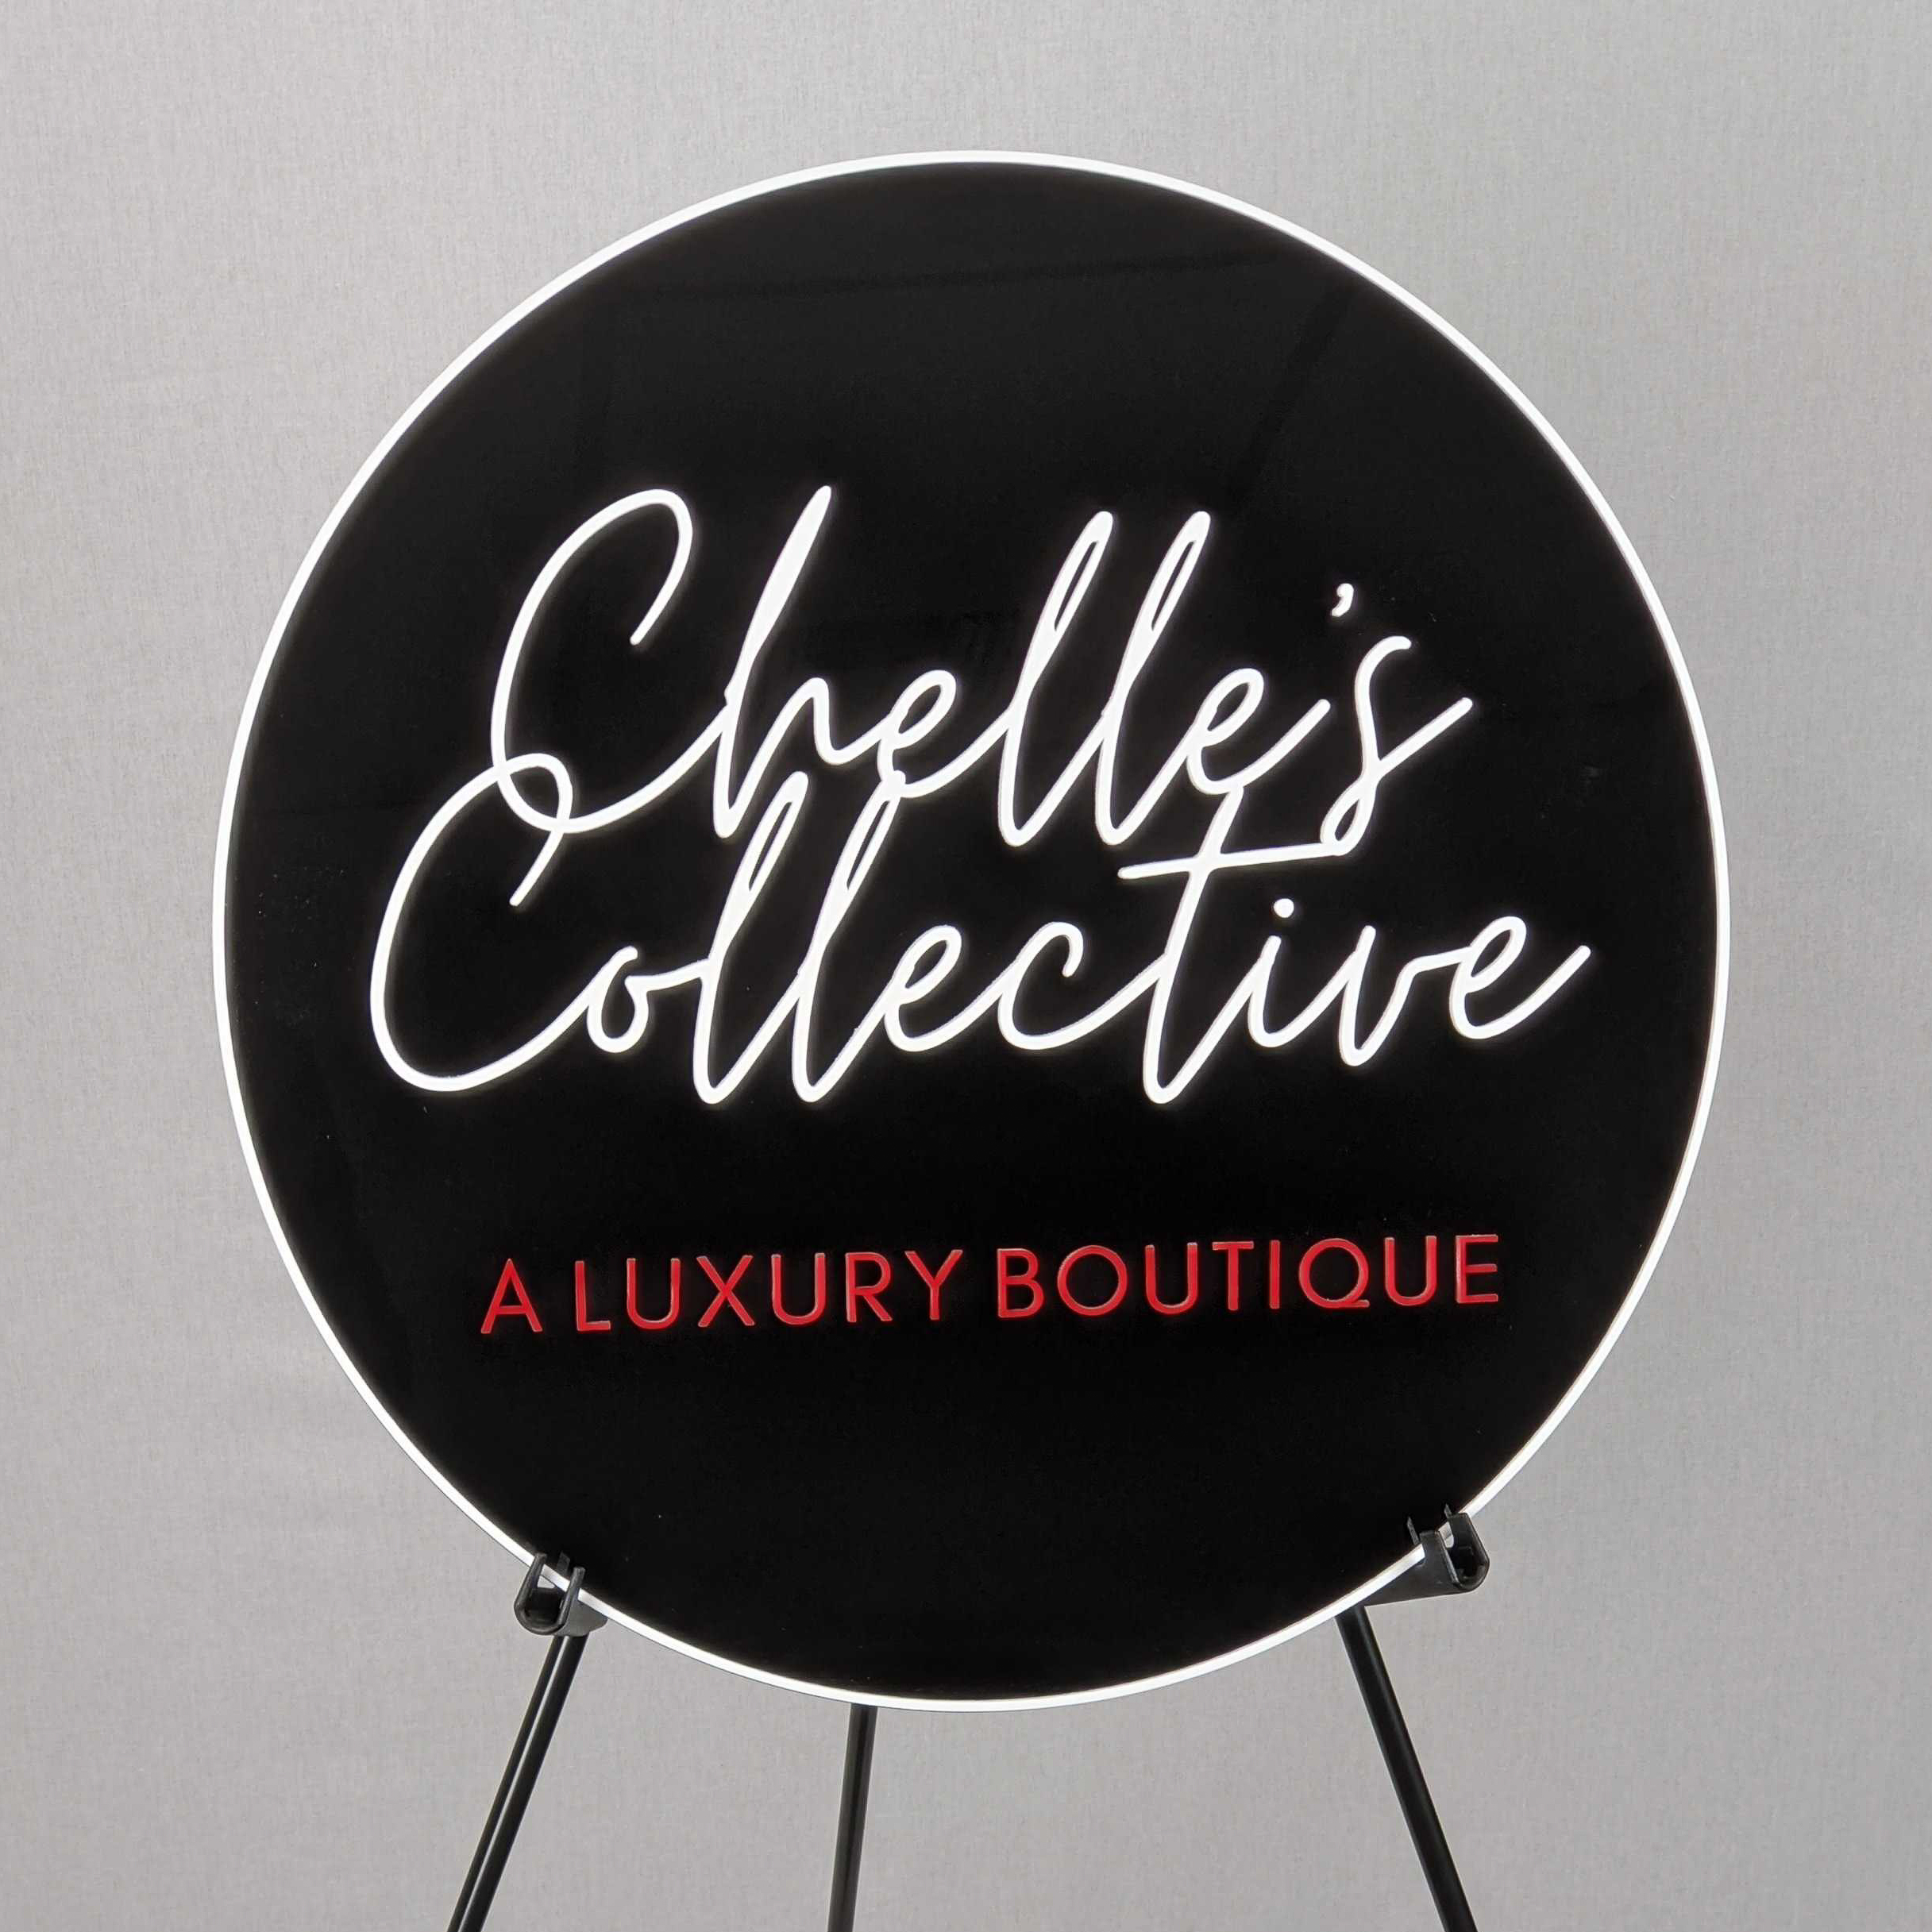 Chelle's Collective